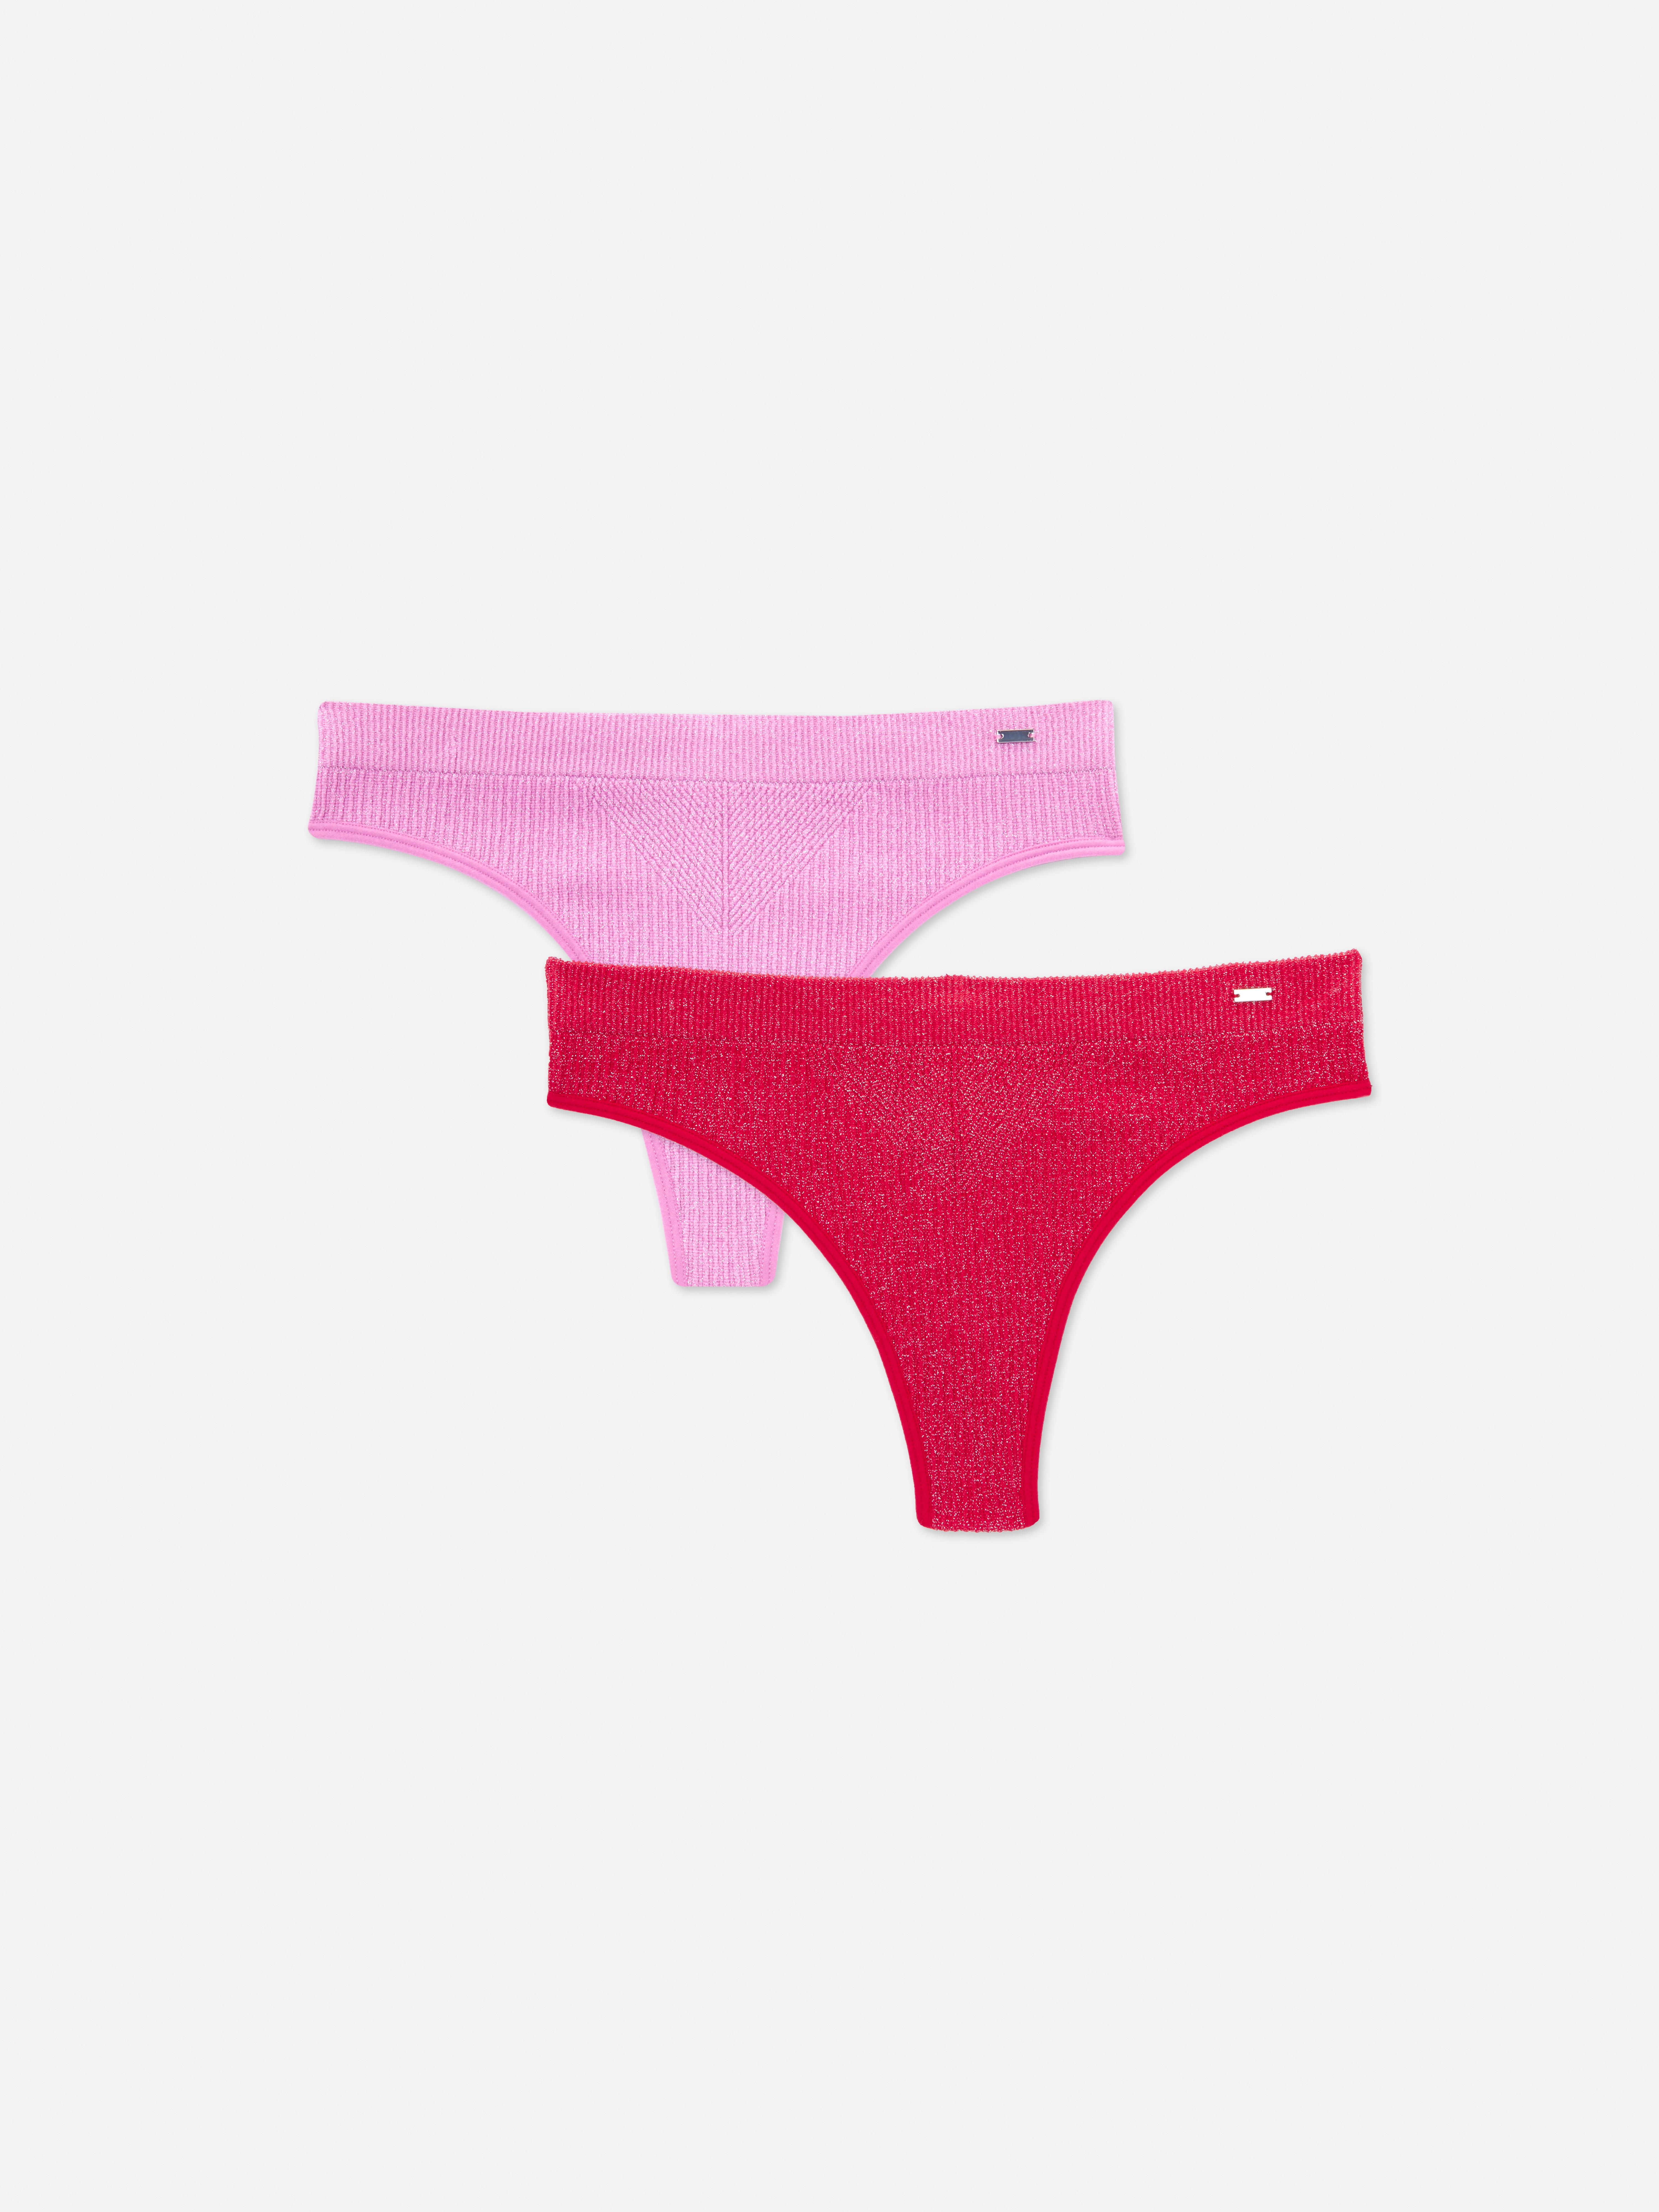 Victoria's Secret PINK Low Rise Cotton Thong Christmas Gingerbread